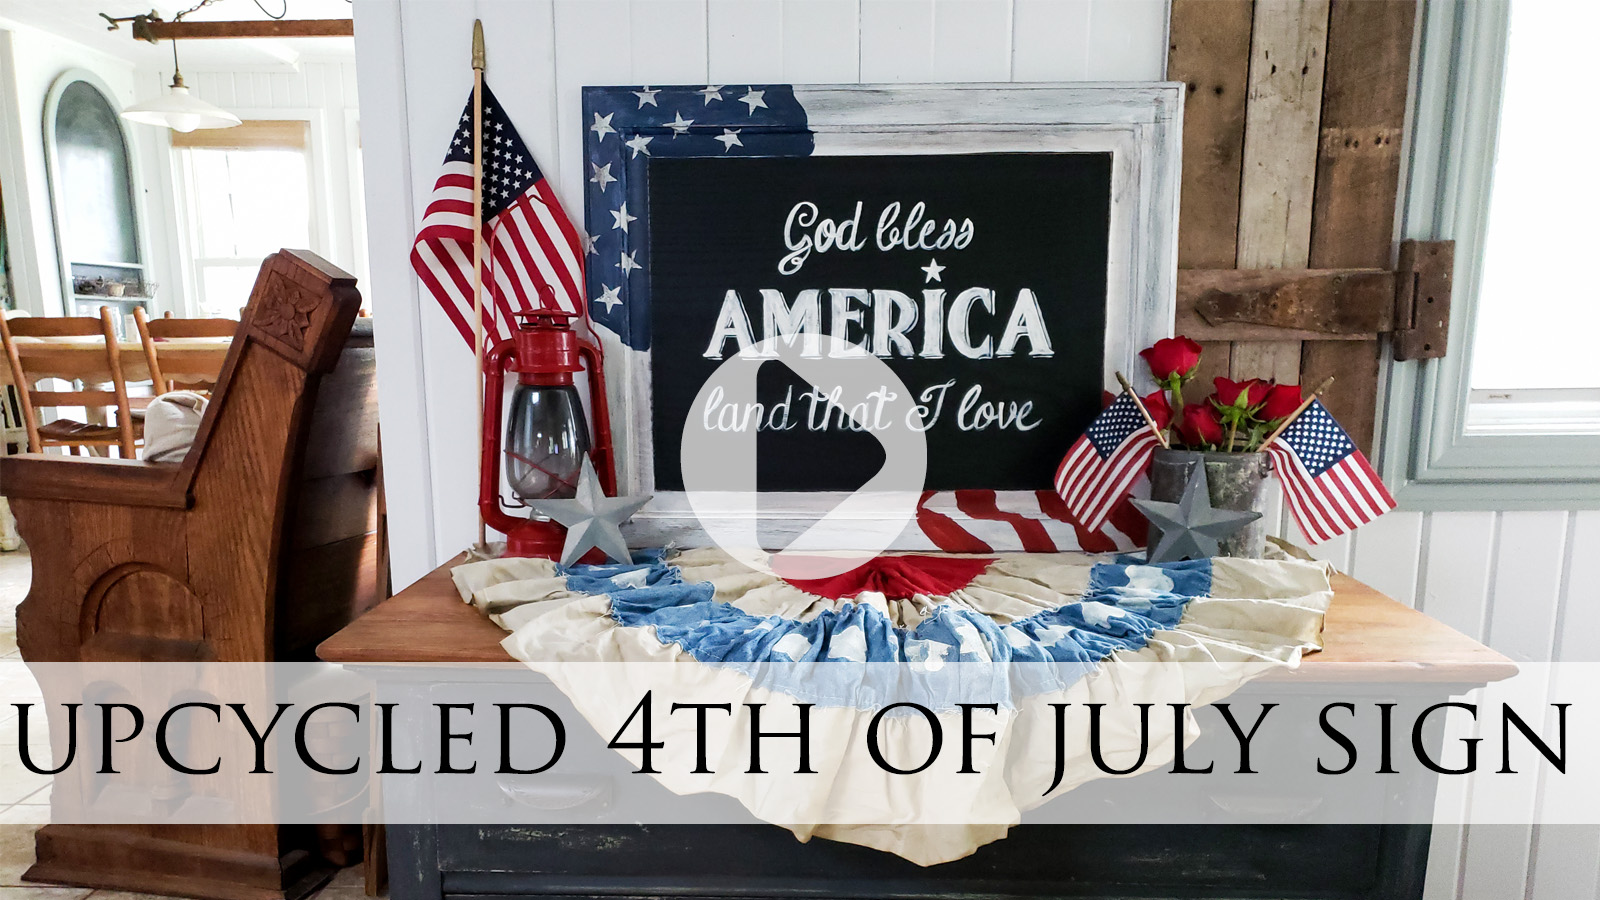 DIY Video Tutorial for Upcycled 4th of July Sign from Cupboard Door by Larissa of Prodigal Pieces | prodigalpieces.com